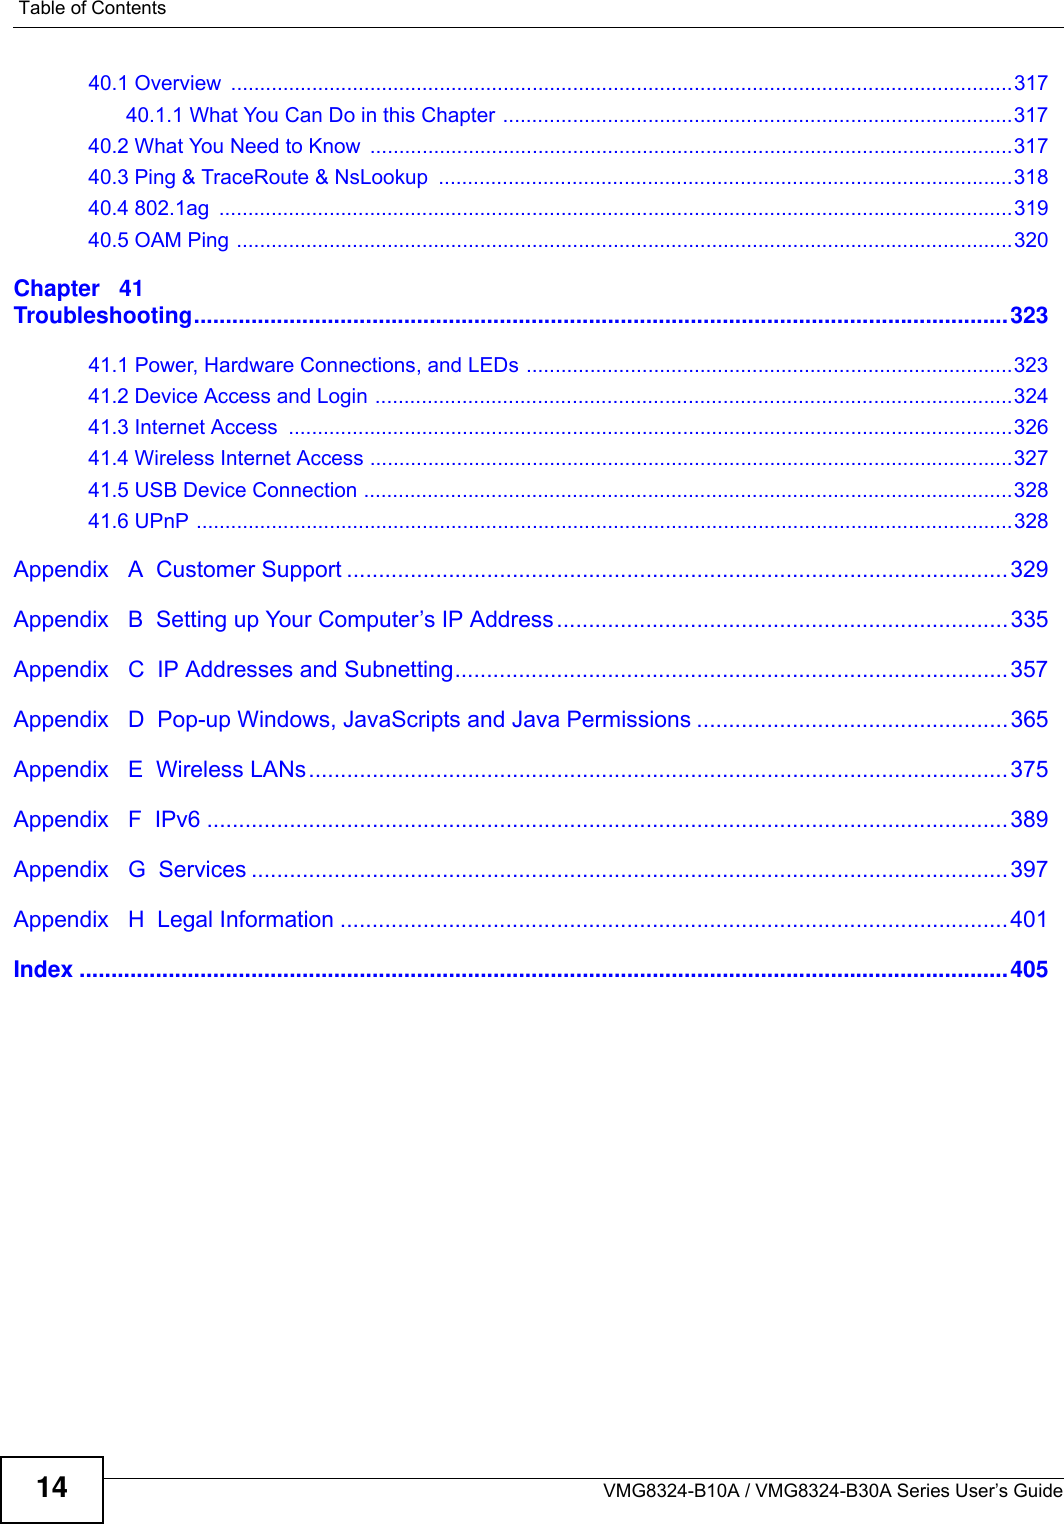 Table of ContentsVMG8324-B10A / VMG8324-B30A Series User’s Guide1440.1 Overview  .......................................................................................................................................31740.1.1 What You Can Do in this Chapter ........................................................................................31740.2 What You Need to Know  ...............................................................................................................31740.3 Ping &amp; TraceRoute &amp; NsLookup  ...................................................................................................31840.4 802.1ag  .........................................................................................................................................31940.5 OAM Ping ......................................................................................................................................320Chapter   41Troubleshooting................................................................................................................................32341.1 Power, Hardware Connections, and LEDs ....................................................................................32341.2 Device Access and Login ..............................................................................................................32441.3 Internet Access  .............................................................................................................................32641.4 Wireless Internet Access ...............................................................................................................32741.5 USB Device Connection ................................................................................................................32841.6 UPnP .............................................................................................................................................328Appendix   A  Customer Support ........................................................................................................329Appendix   B  Setting up Your Computer’s IP Address.......................................................................335Appendix   C  IP Addresses and Subnetting.......................................................................................357Appendix   D  Pop-up Windows, JavaScripts and Java Permissions .................................................365Appendix   E  Wireless LANs..............................................................................................................375Appendix   F  IPv6 ..............................................................................................................................389Appendix   G  Services .......................................................................................................................397Appendix   H  Legal Information .........................................................................................................401Index ..................................................................................................................................................405